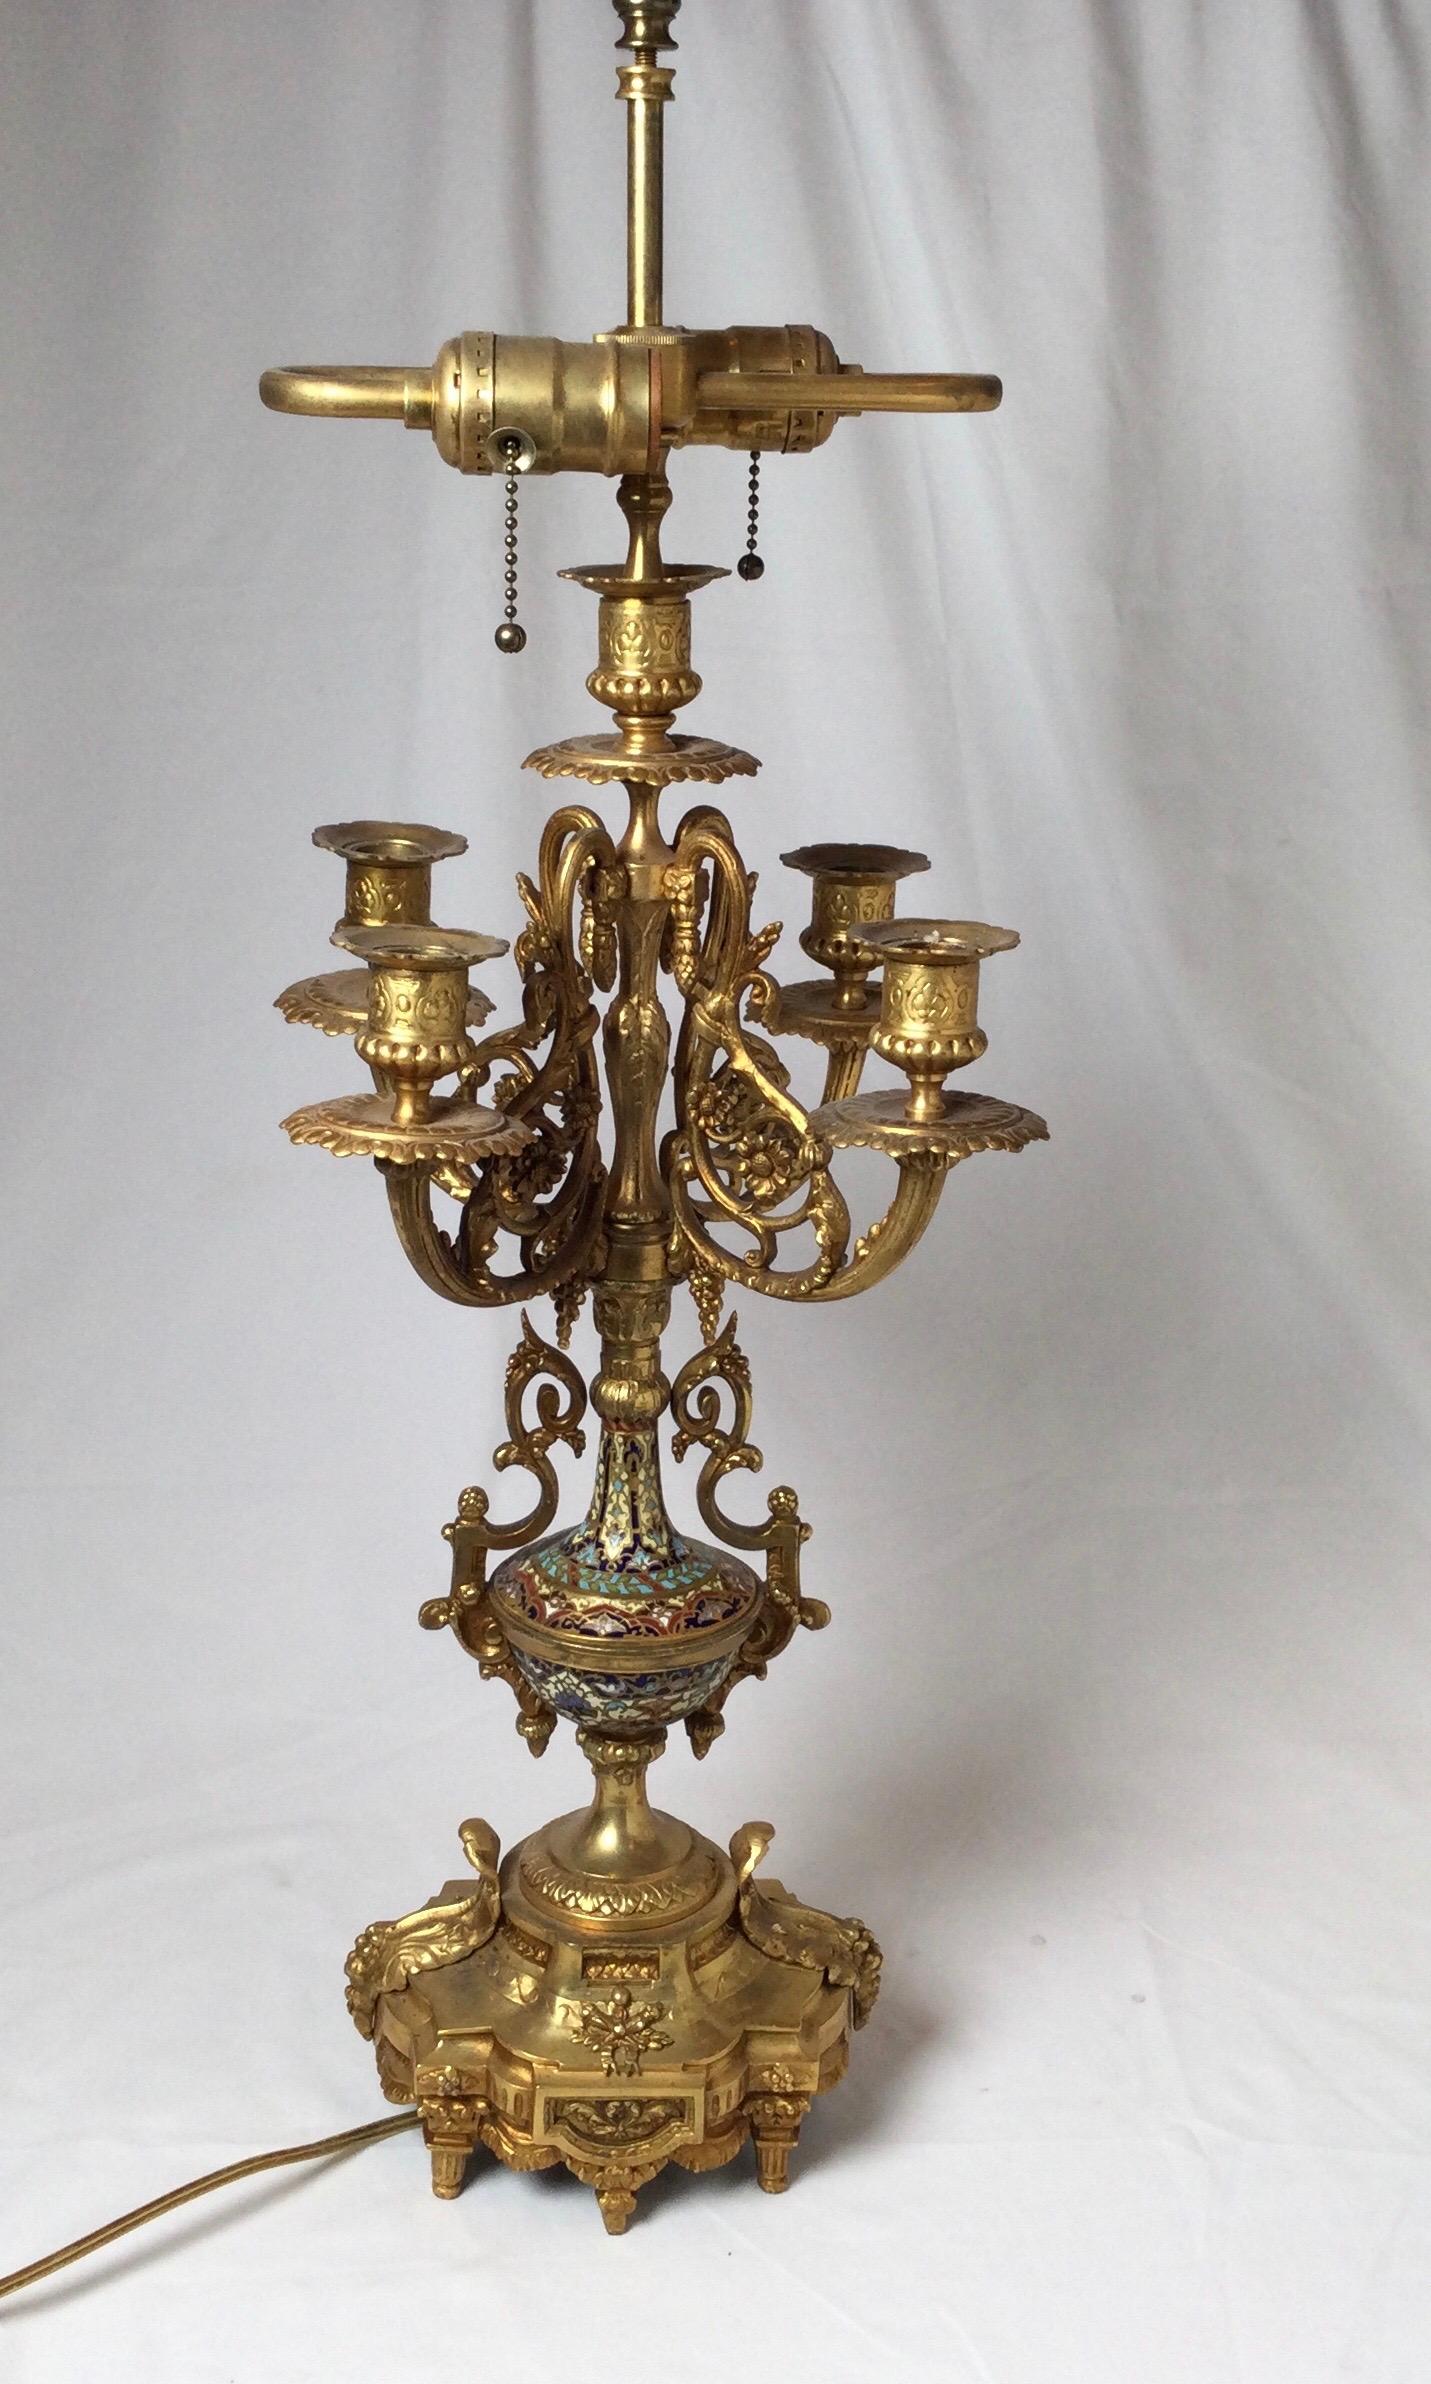 Elegant gilt cast bronze 19th century candelabra with four arms and center arm. The bronze with champlevé enamel decoration. The shade is for photographic purposes only and not included. New Wiring. The lamp with a shade is 29.5 inches high.